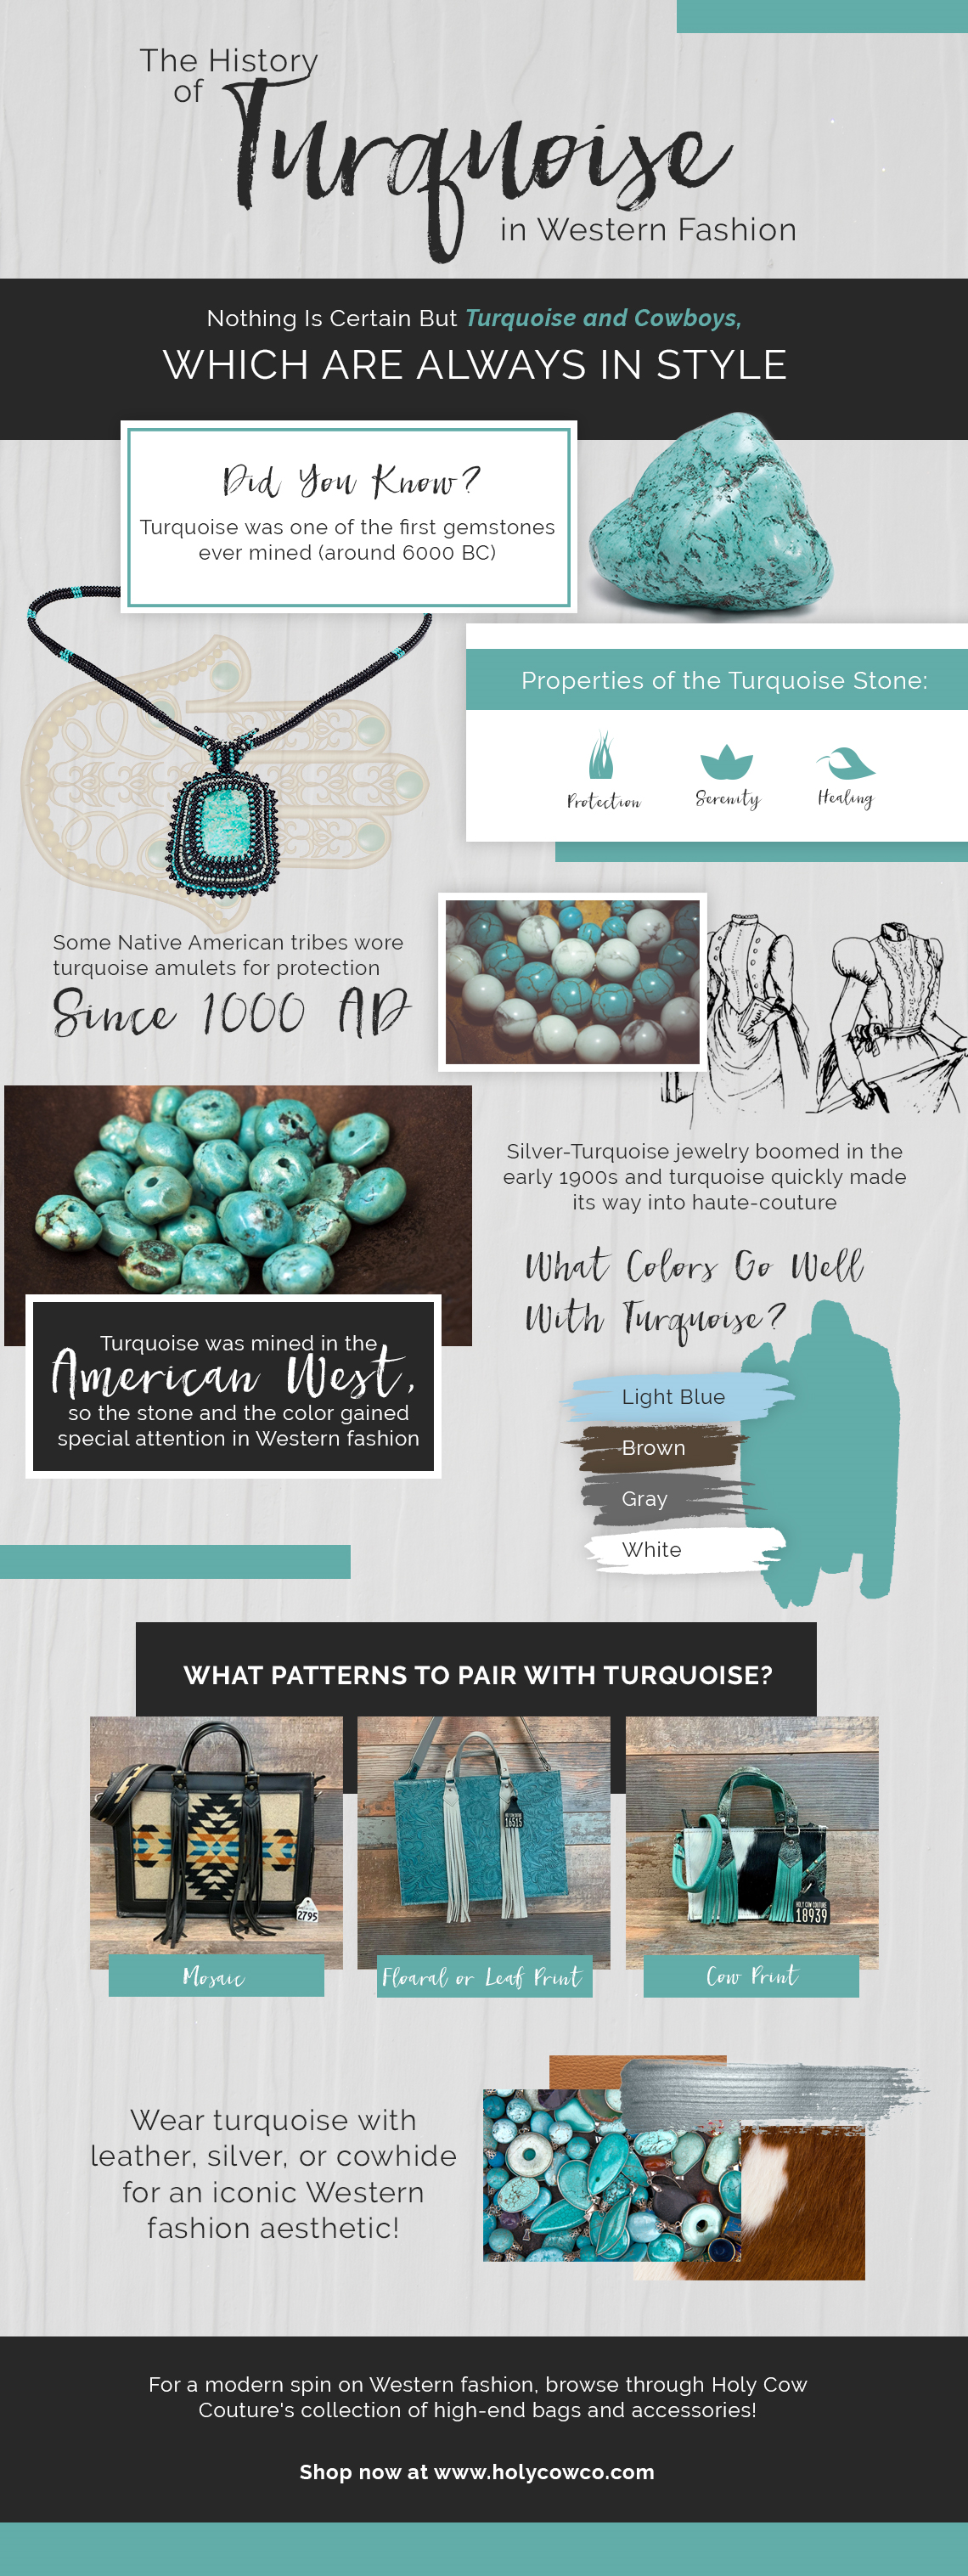 turquoise and western fashion infographic